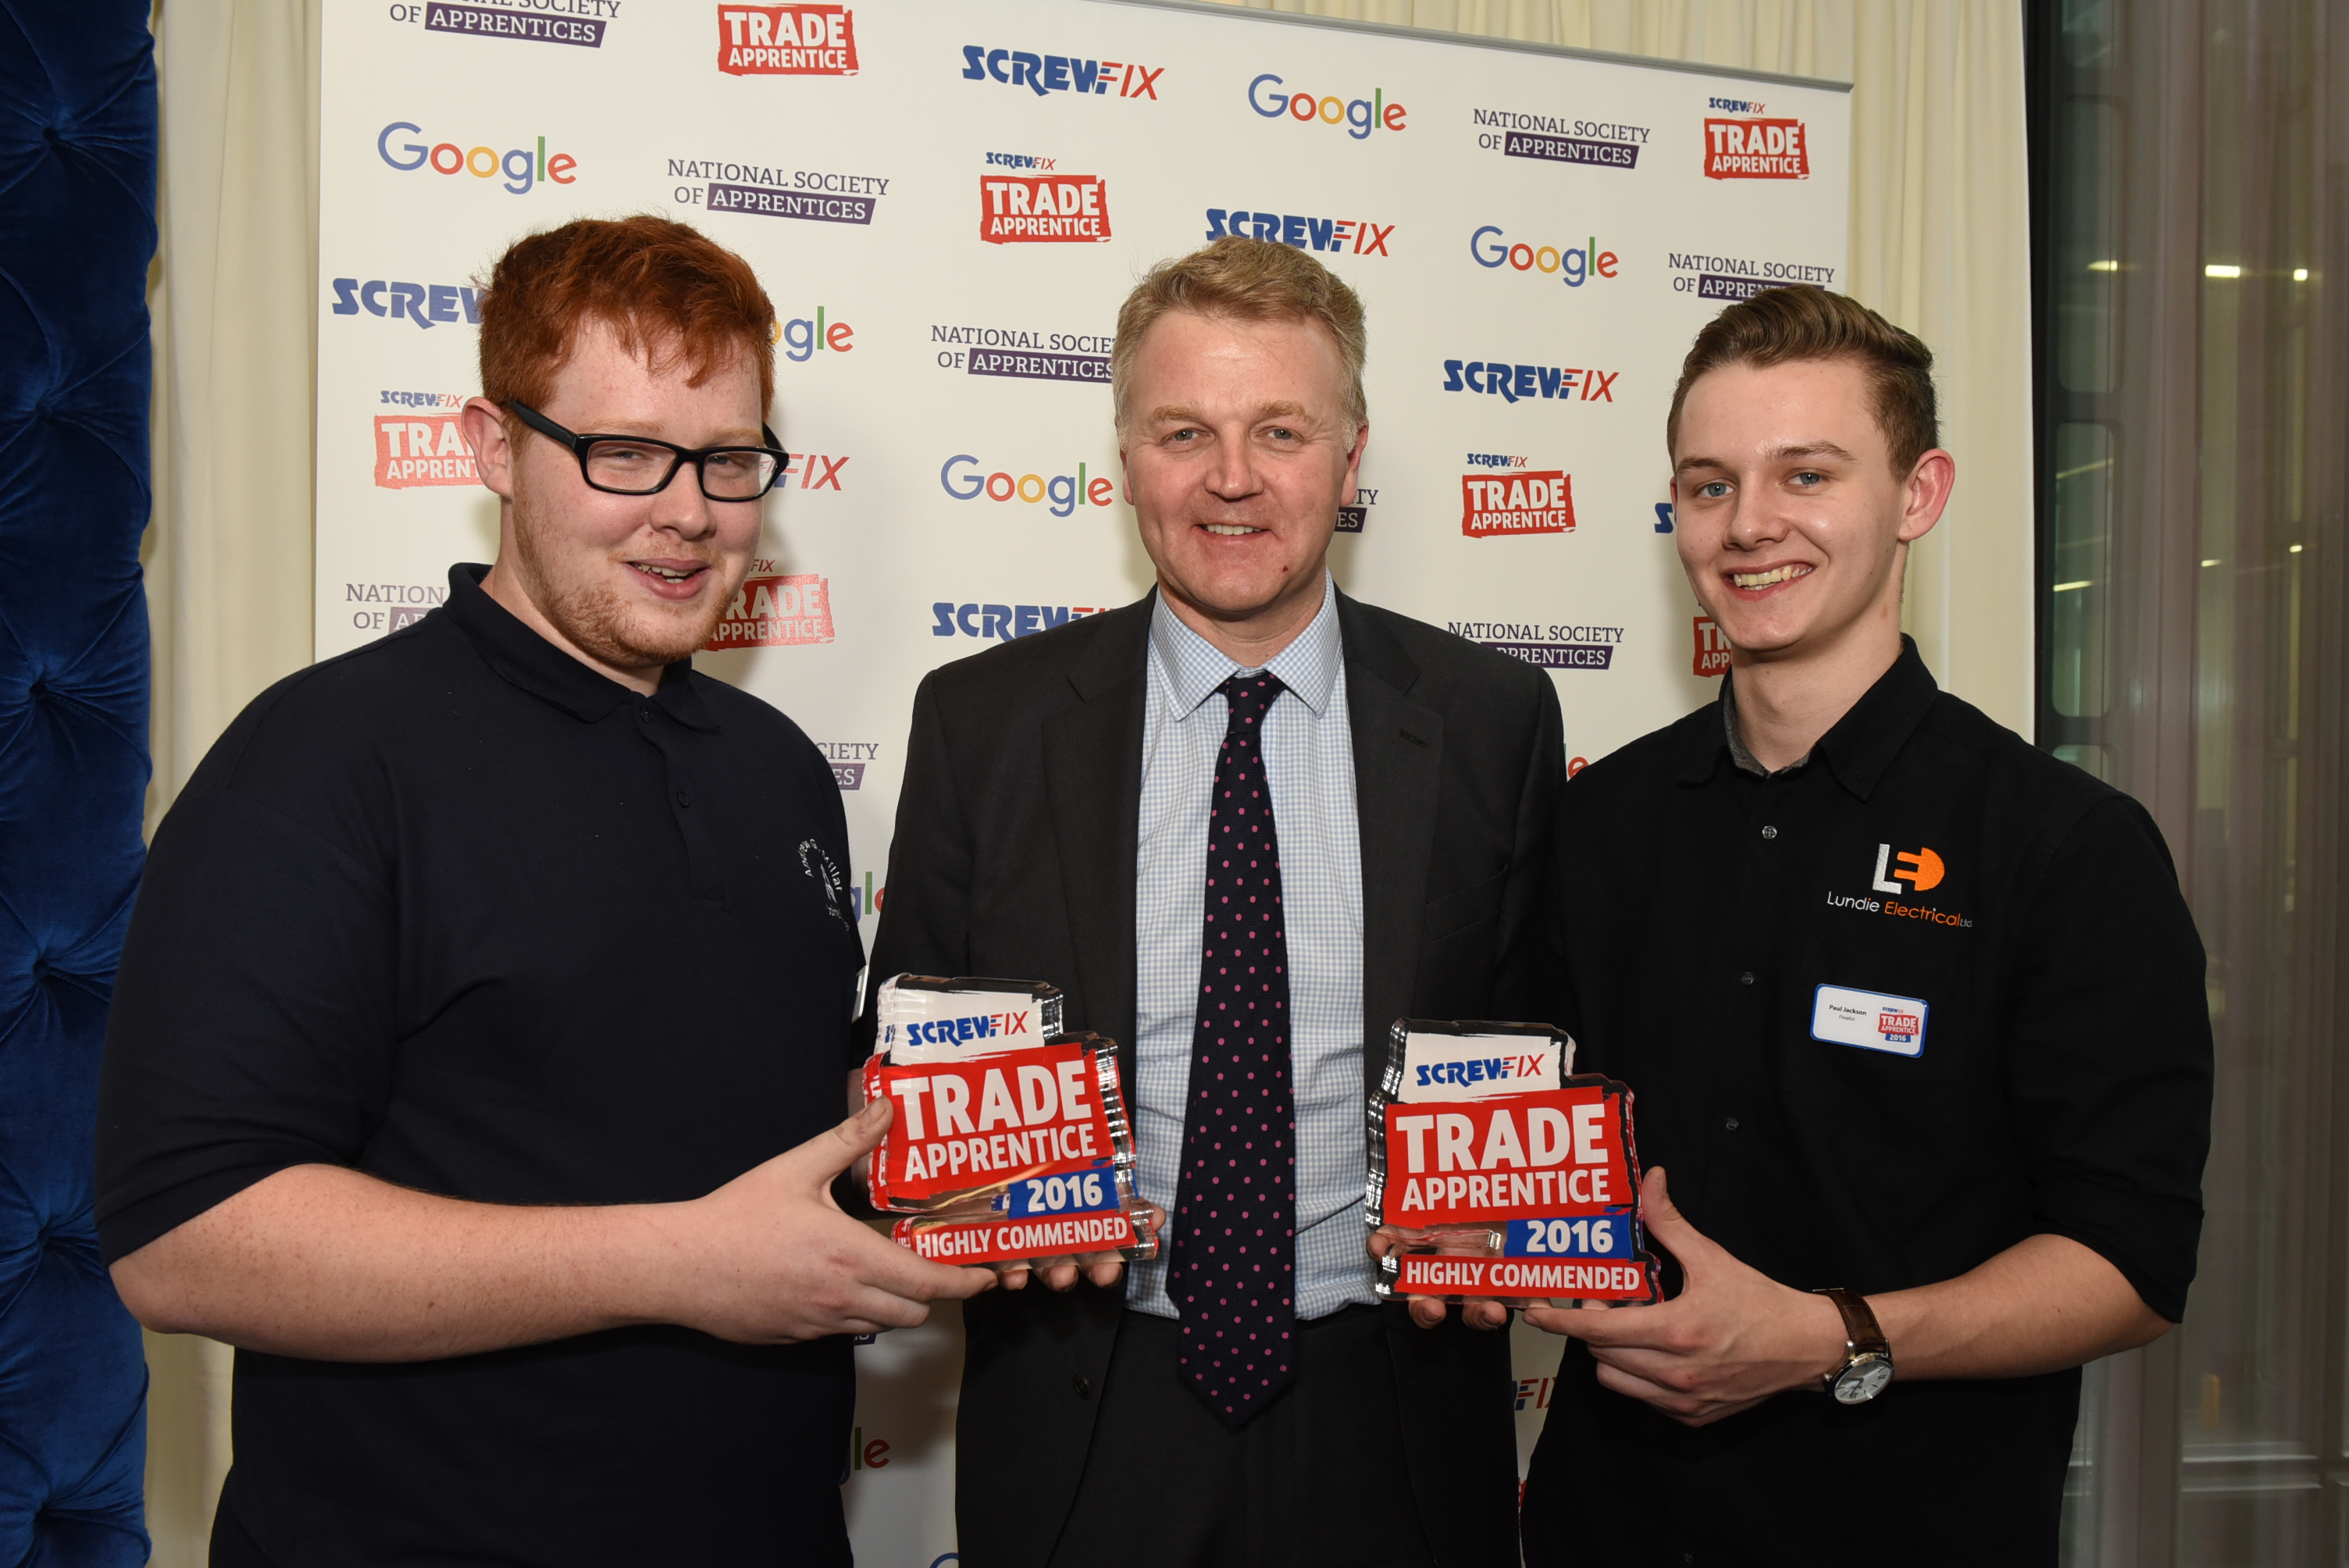 Apprentice from Nantwich is recognised as one of the best apprentices in the UK!